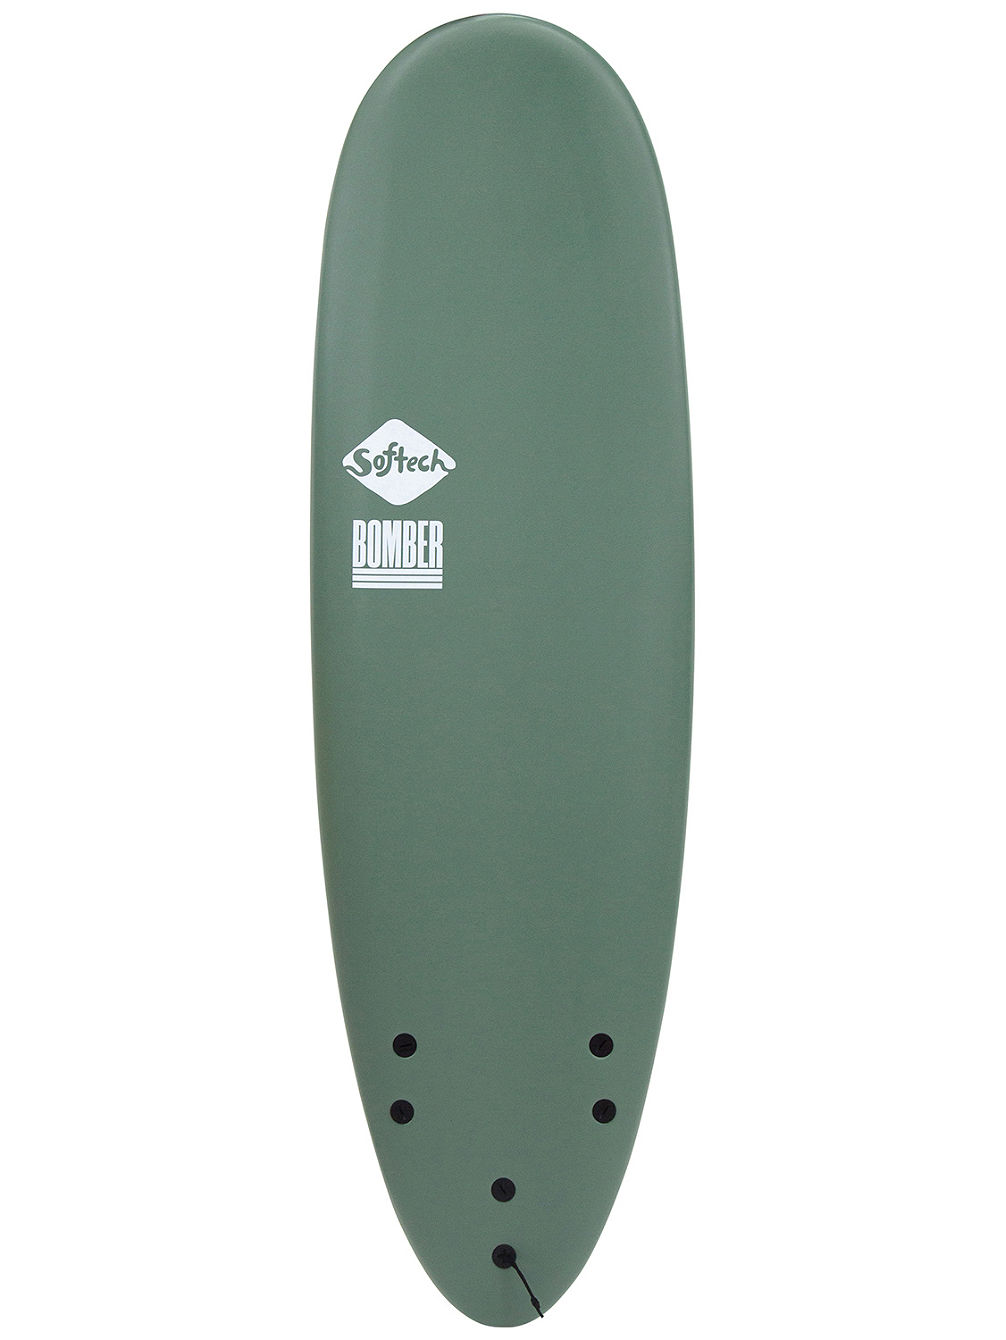 Bomber FCS II 5&amp;#039;10 Softtop Surfboard